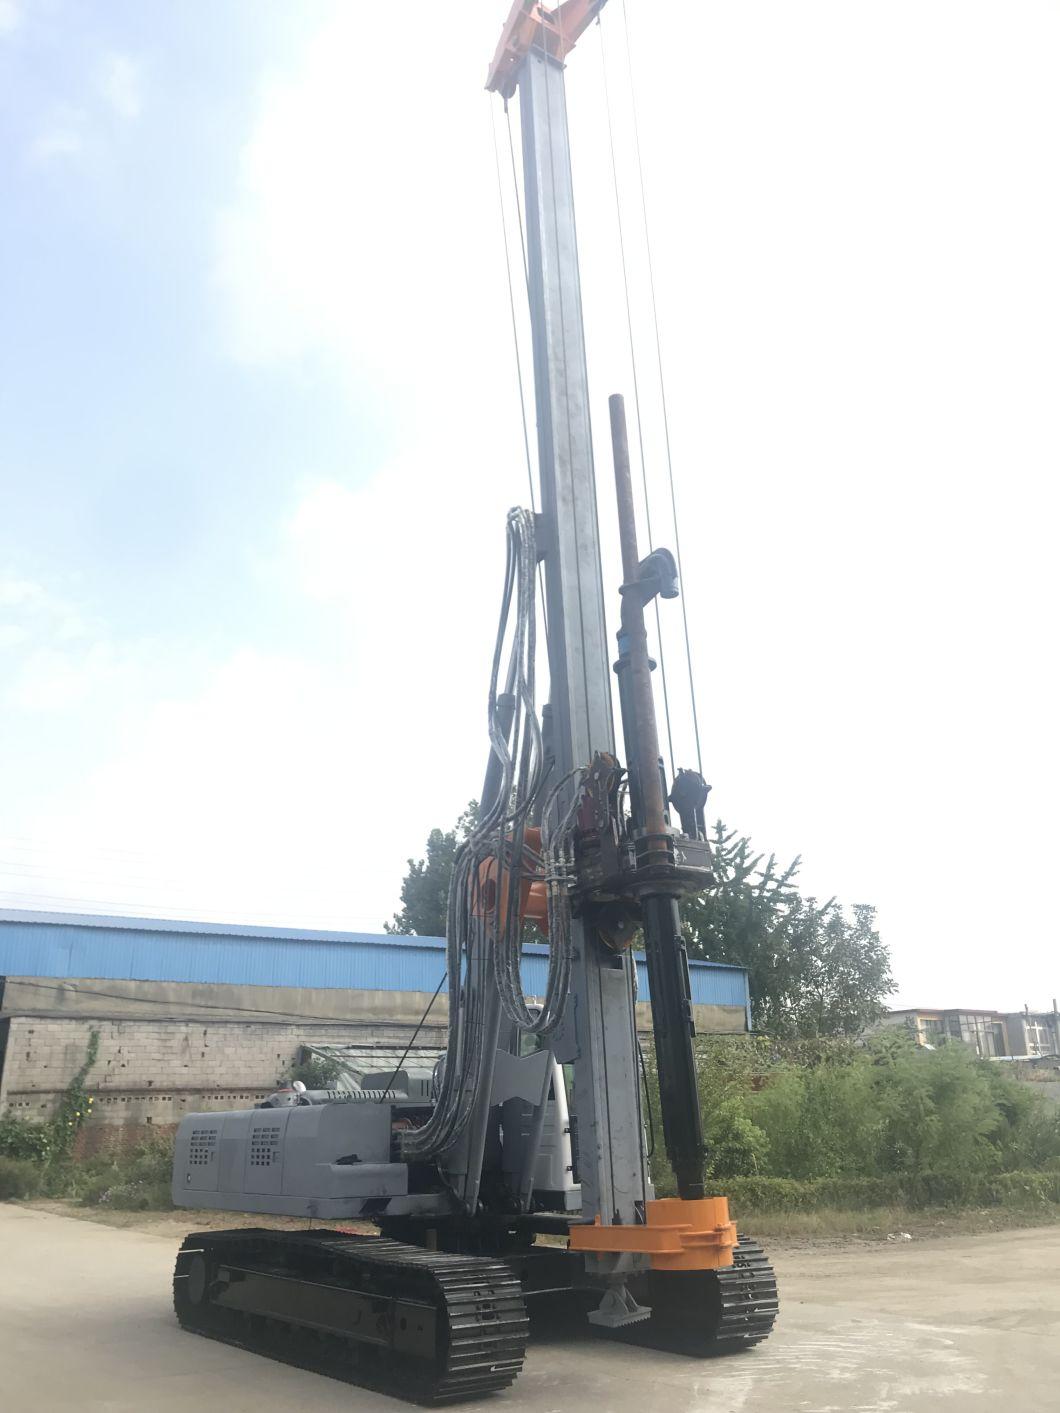 Piling Driving Small Portable Hydraulic Auger Driver Portable Drilling Rig